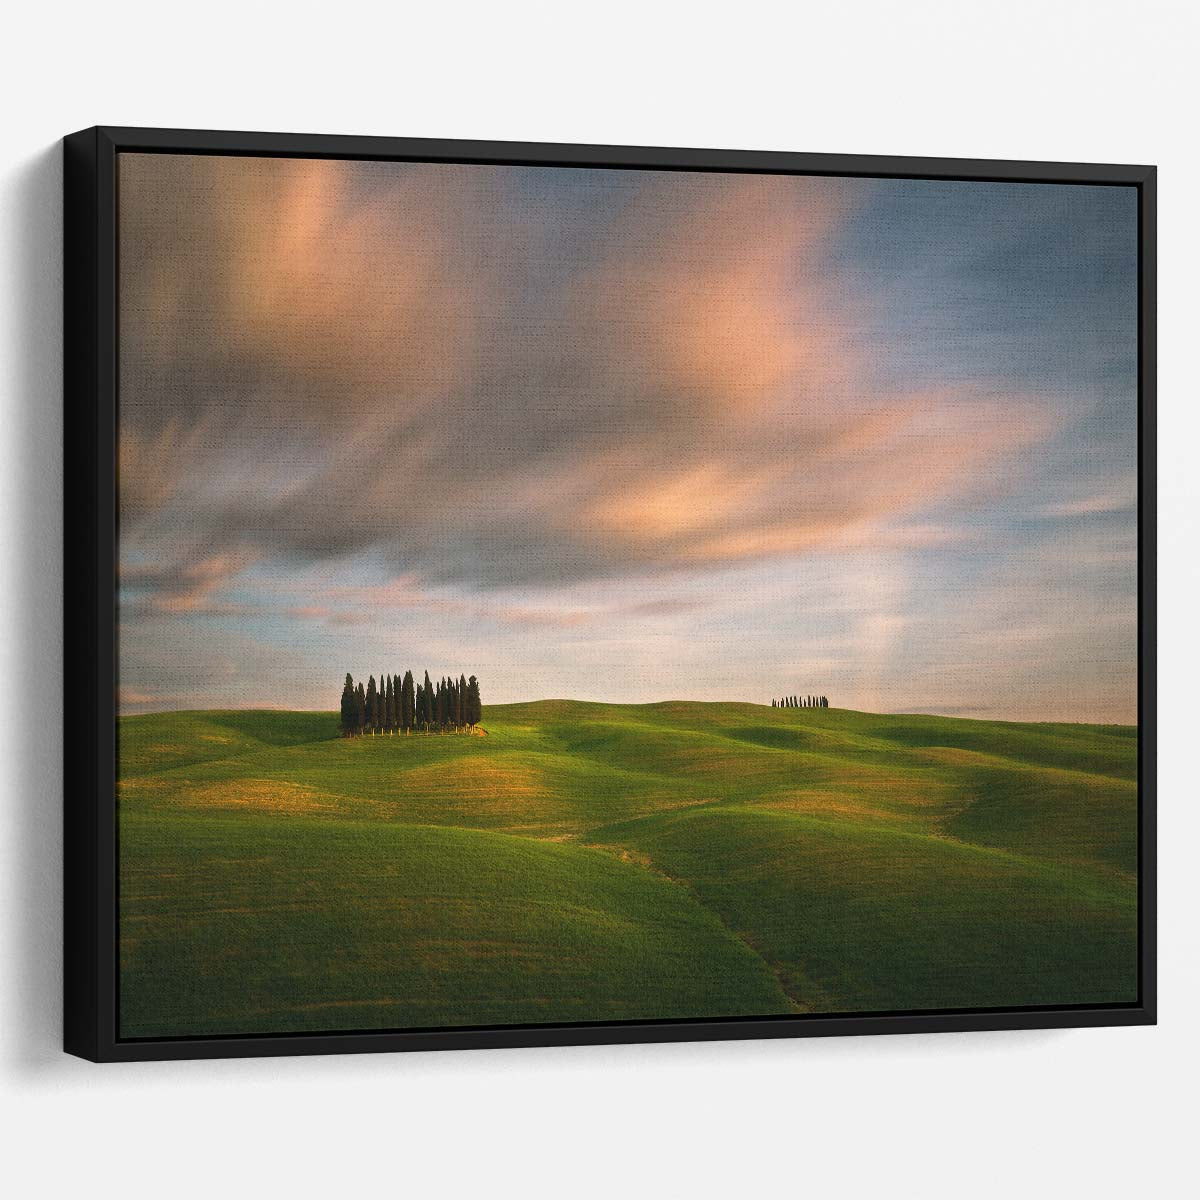 Iconic Tuscany Cypress Hills Sunset Wall Art by Luxuriance Designs. Made in USA.